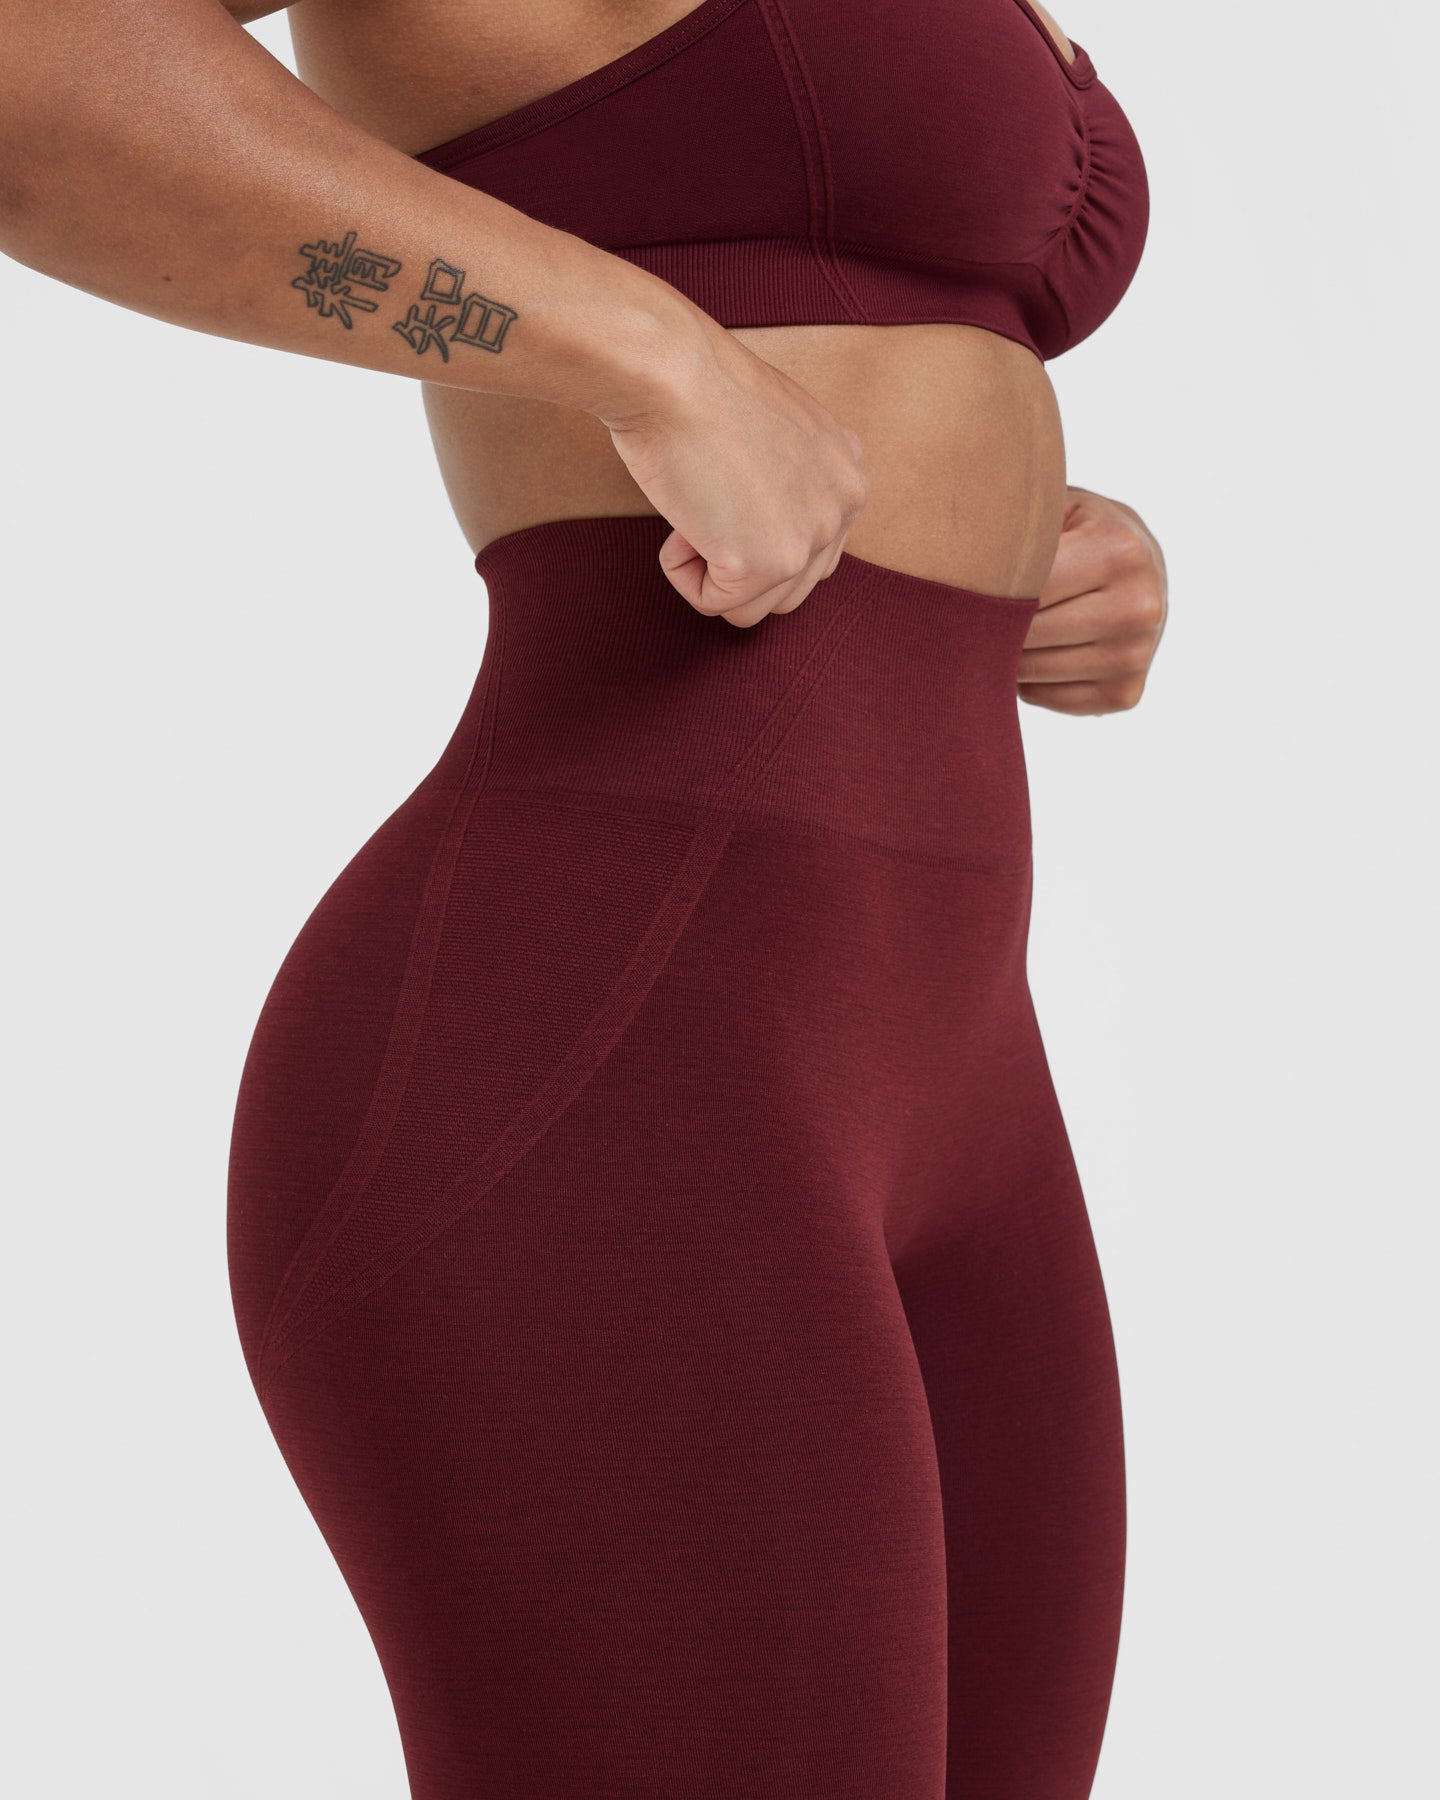 YONDIT Rosewood Curve Seamless High Neck Sports Bra - Shop Now!